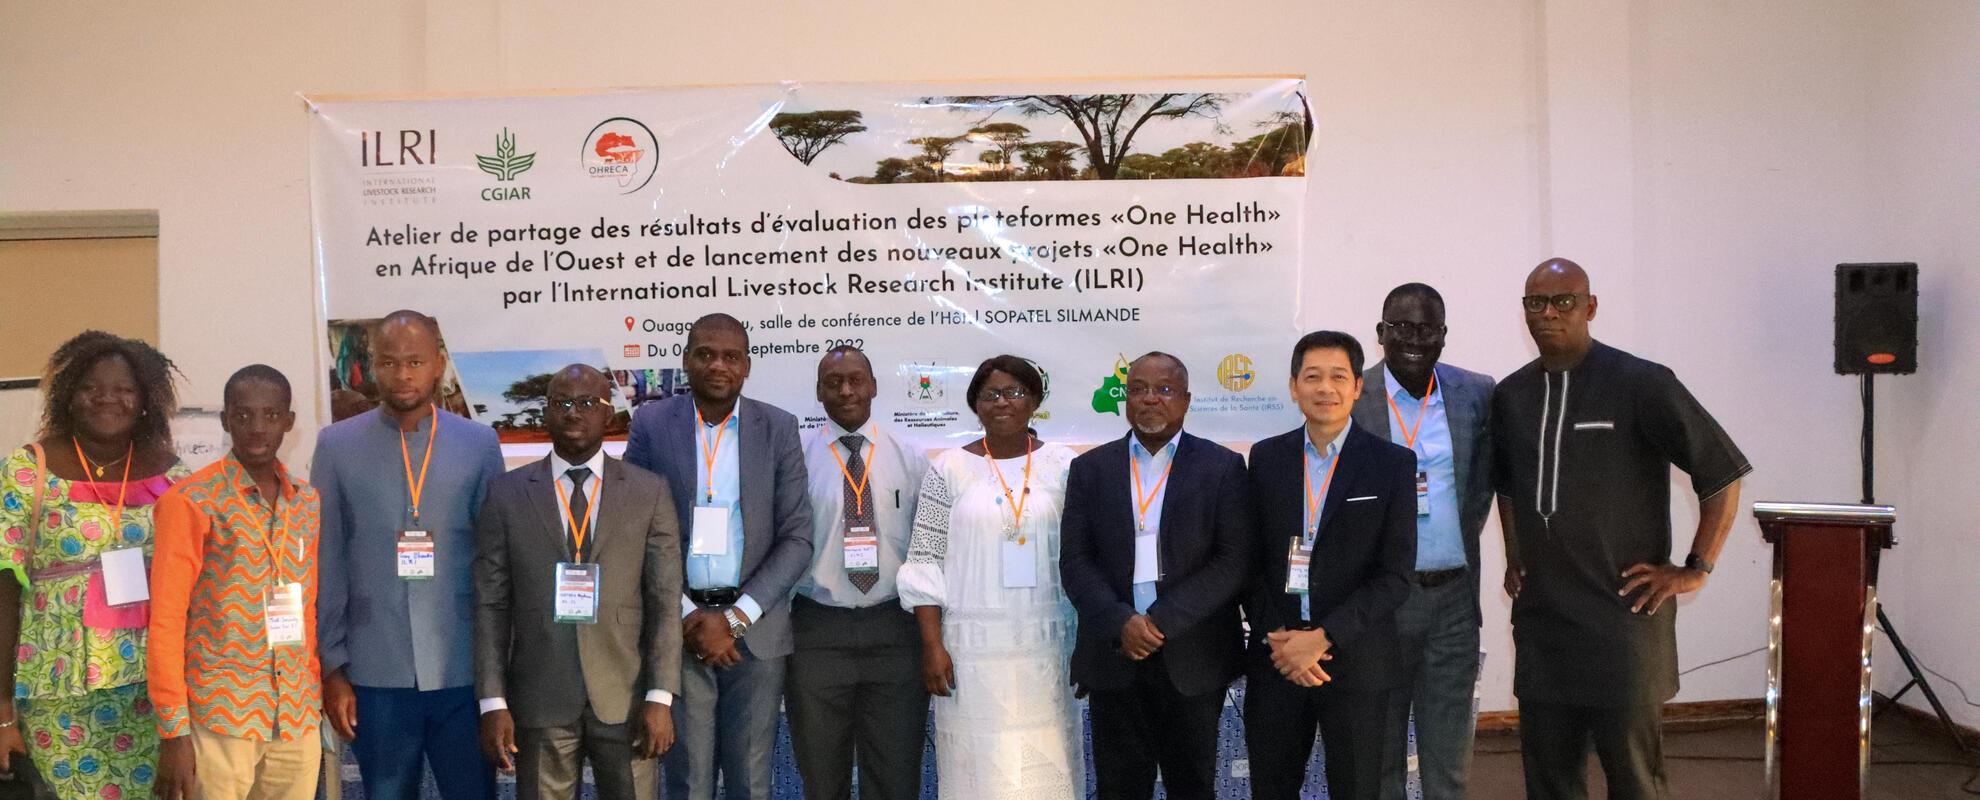 One Health stakeholders in West Africa